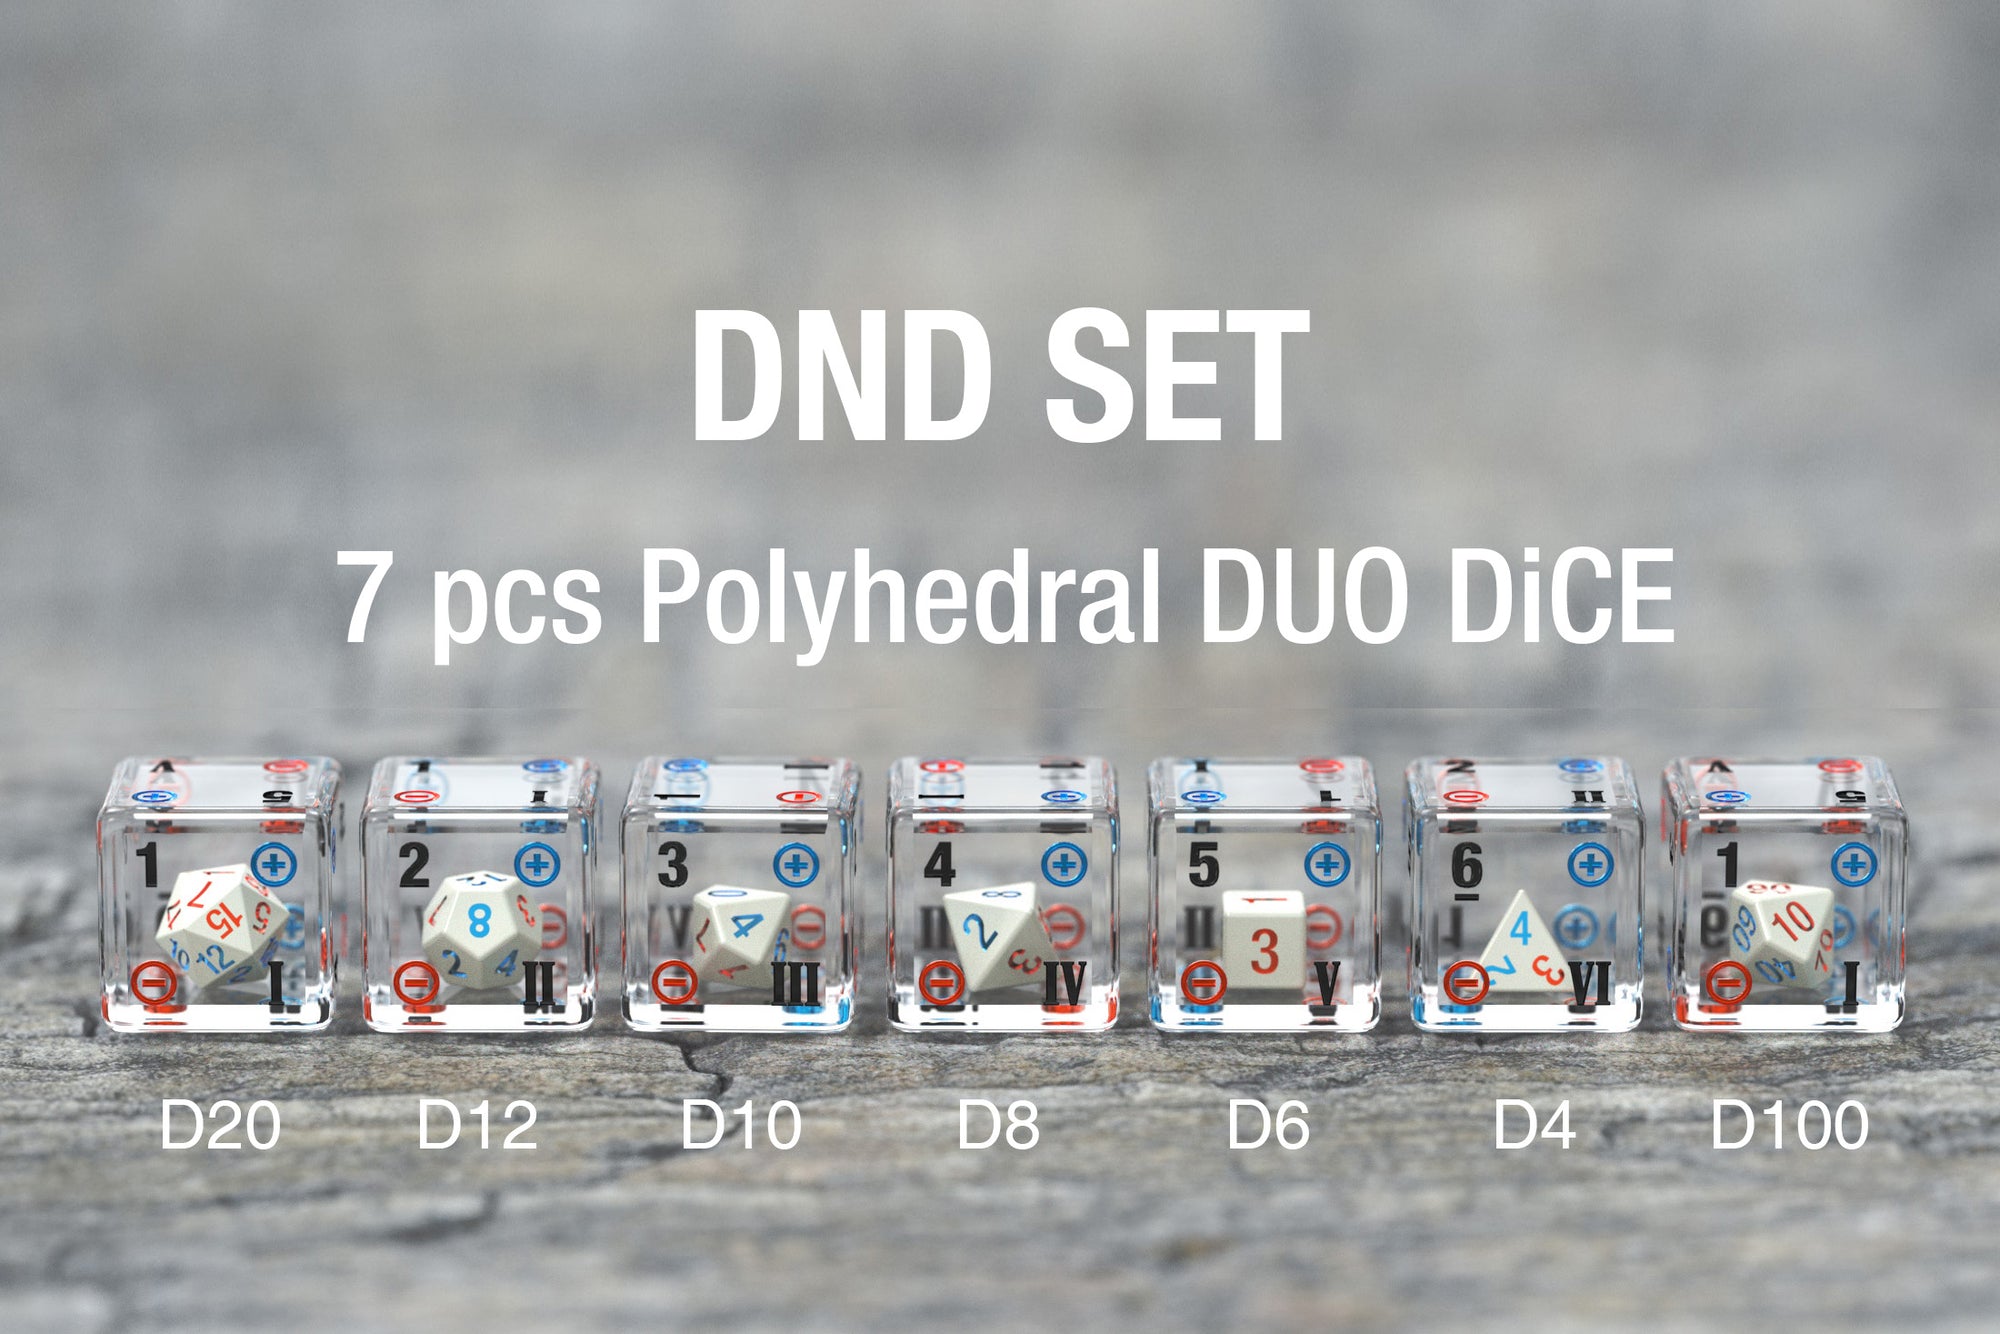 Check out our Polyhedral set